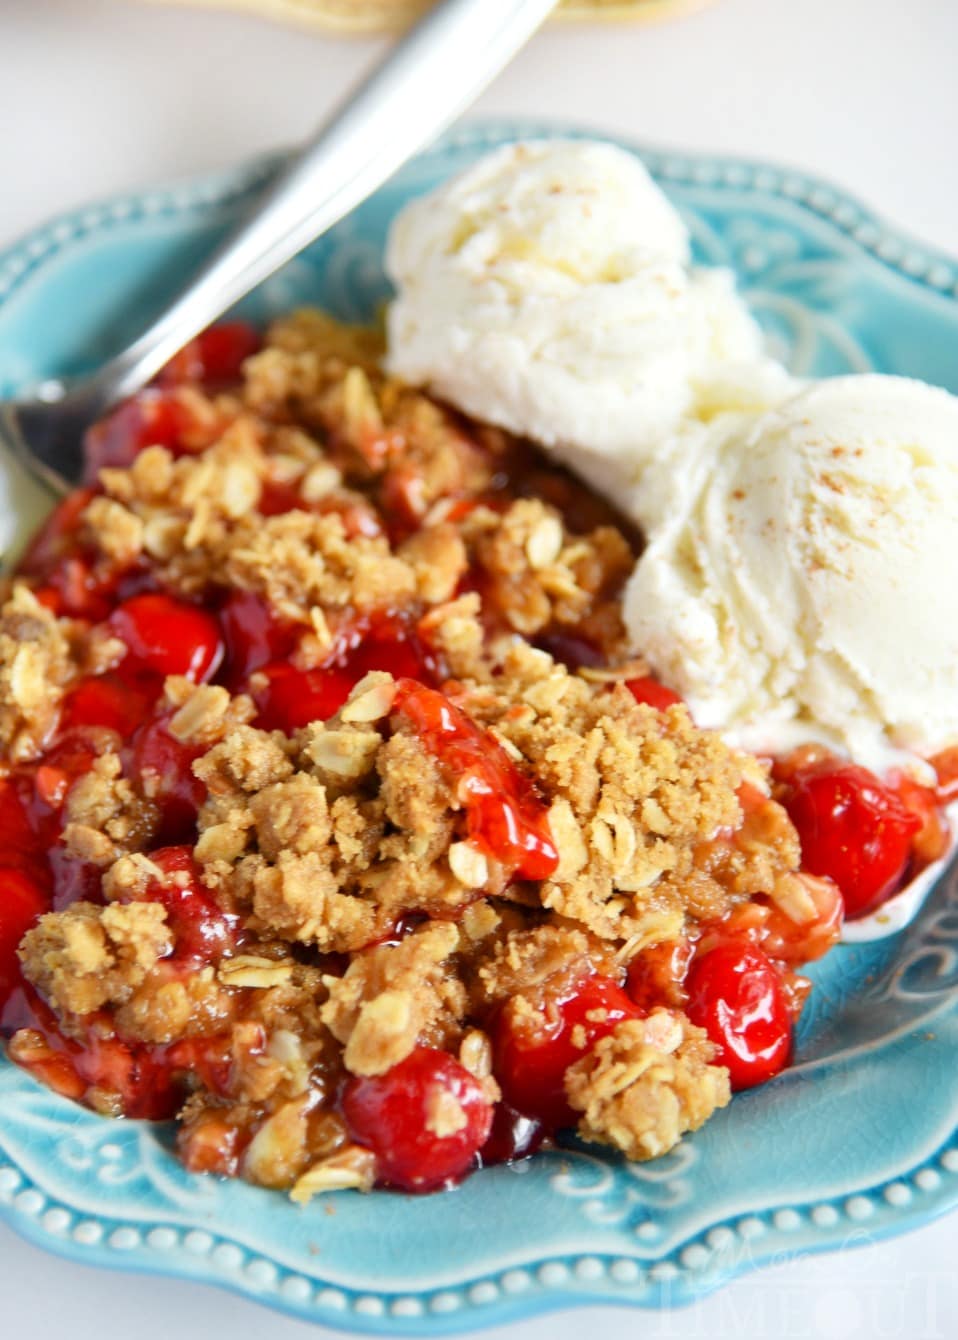 This Easy Cherry Almond Crisp will be the star of the show no matter when you make it! Serve with a scoop of vanilla ice cream for a dessert that will have friends and family moaning with delight! This easy dessert is sure to quickly become a new favorite!